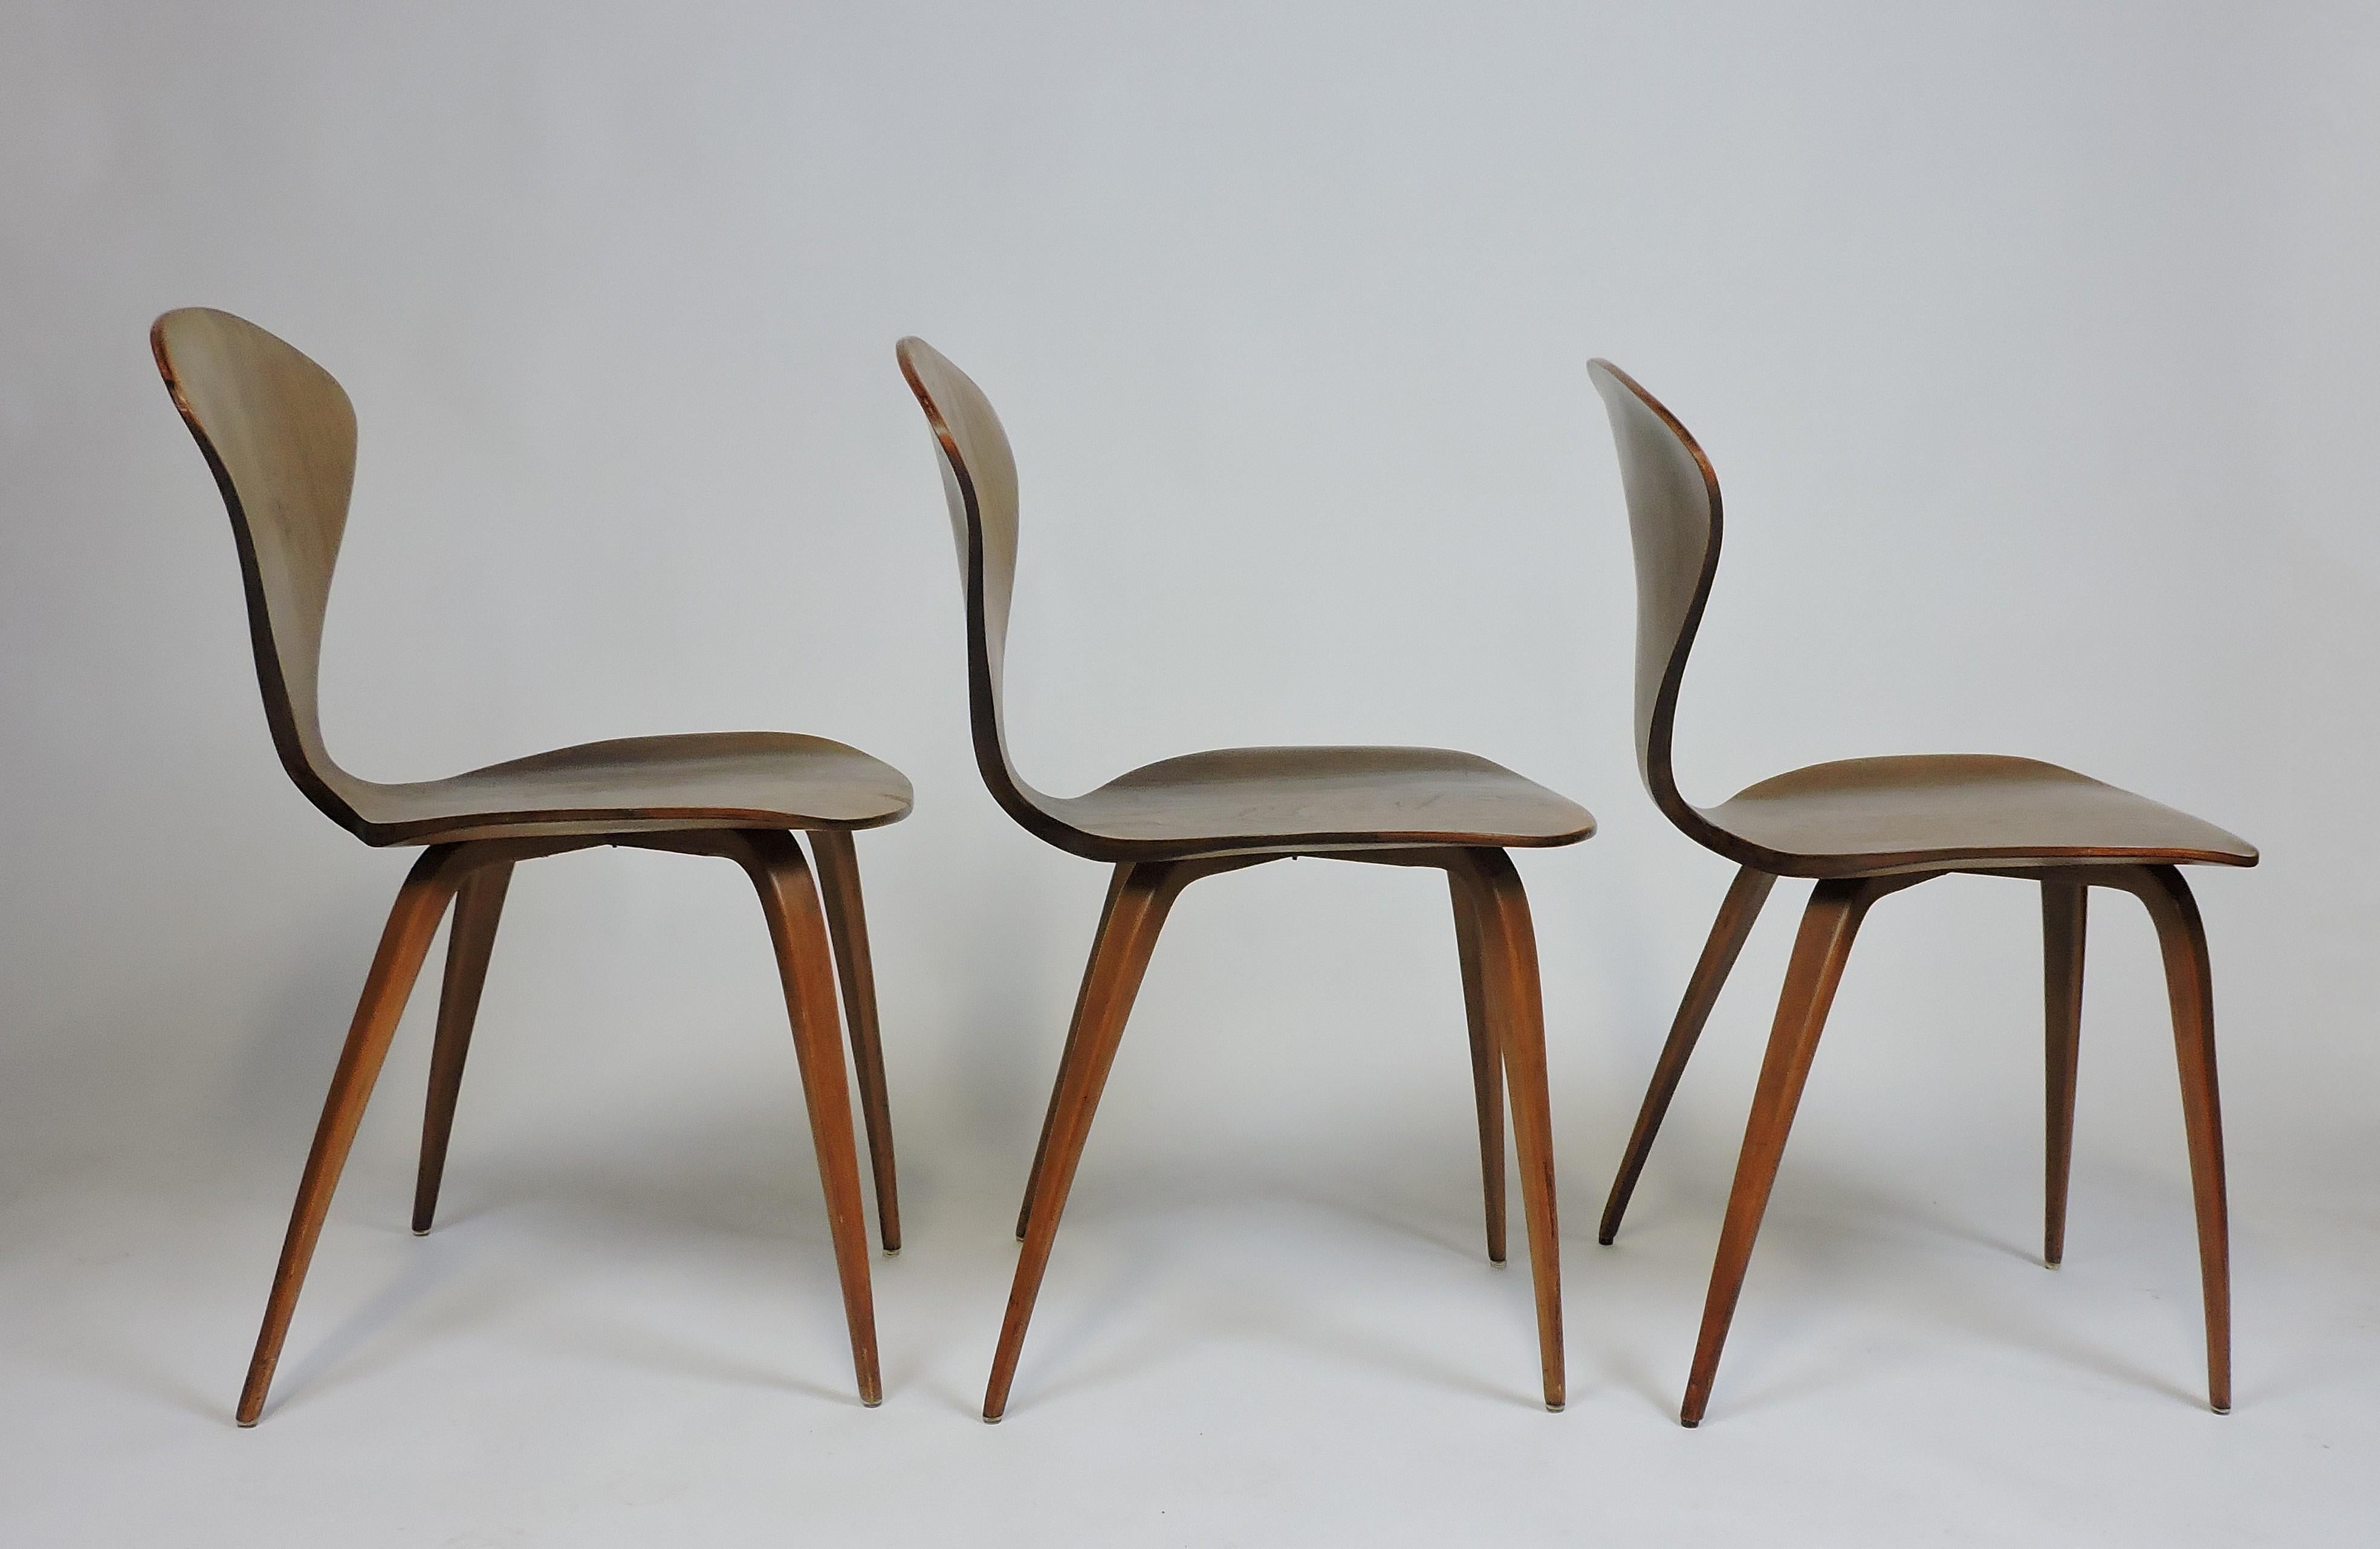 Laminated Set of Three Original Cherner Mid-Century Modern Dining or Side Chairs, 1960s